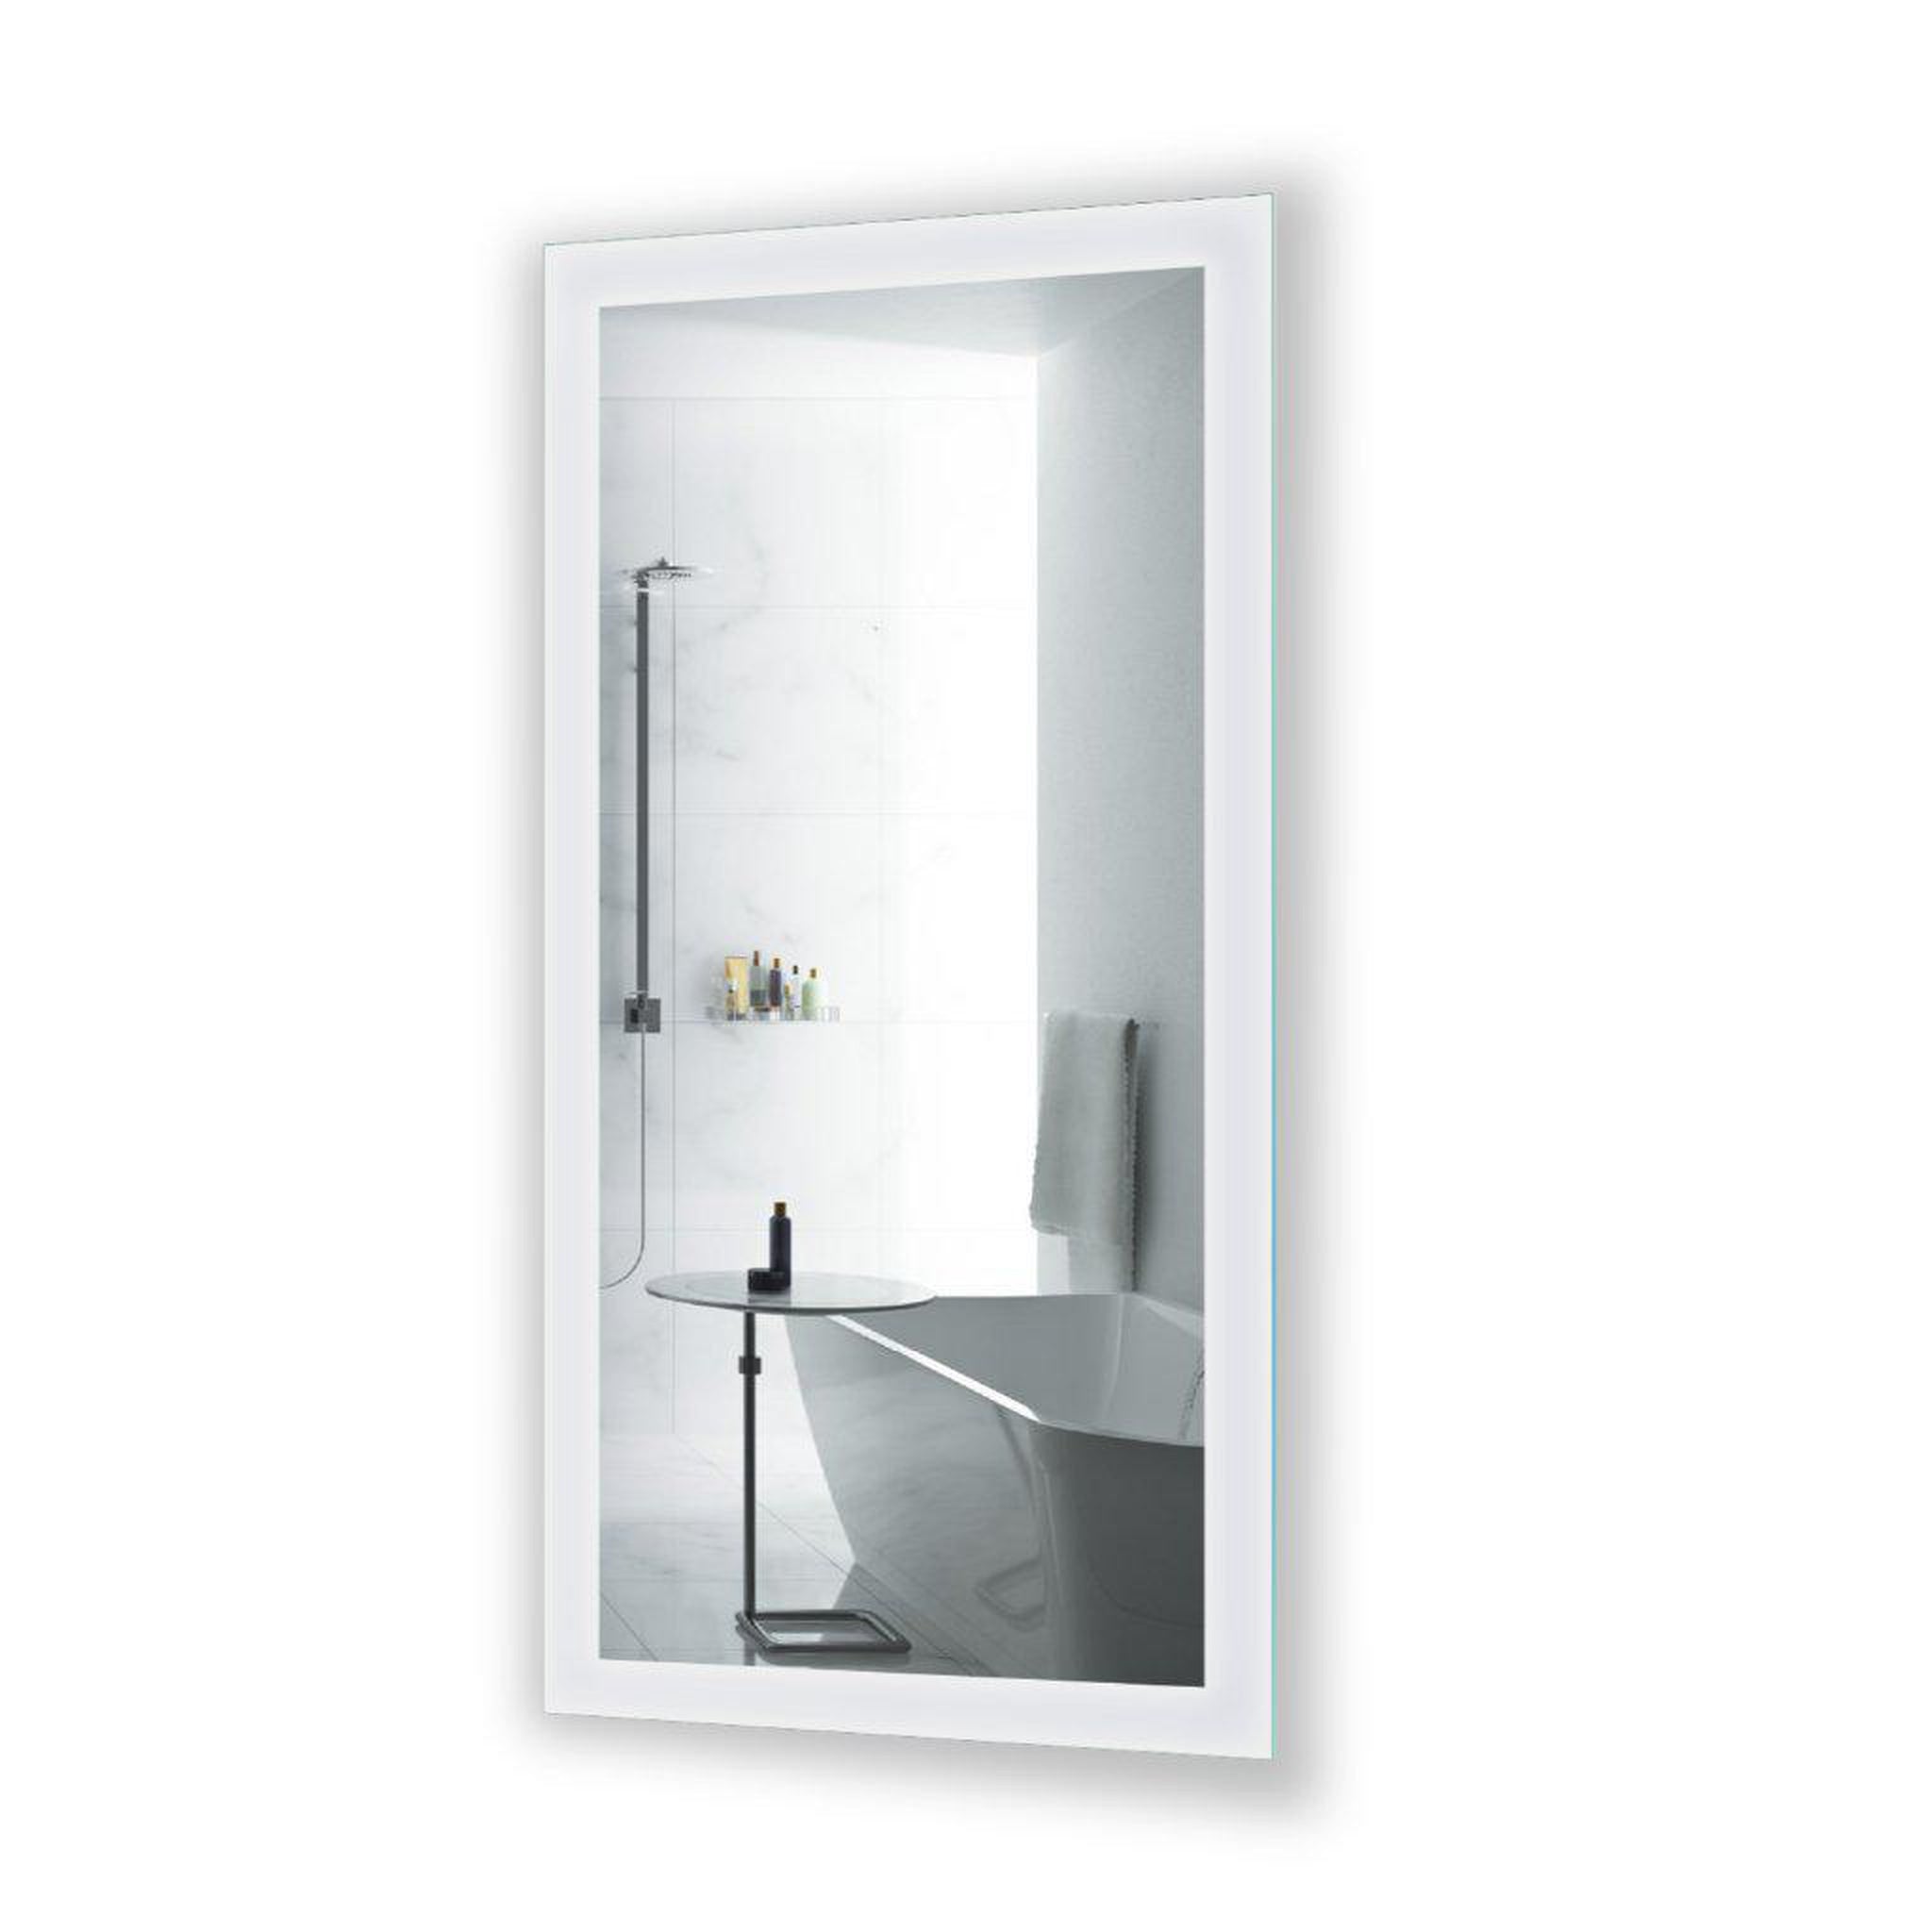 Krugg Reflections, Krugg Reflections Bijou 15" x 30" Small Rectangular Wall-Mounted 5000K LED Bathroom Vanity Mirror With Built-in Defogger and Dimmer